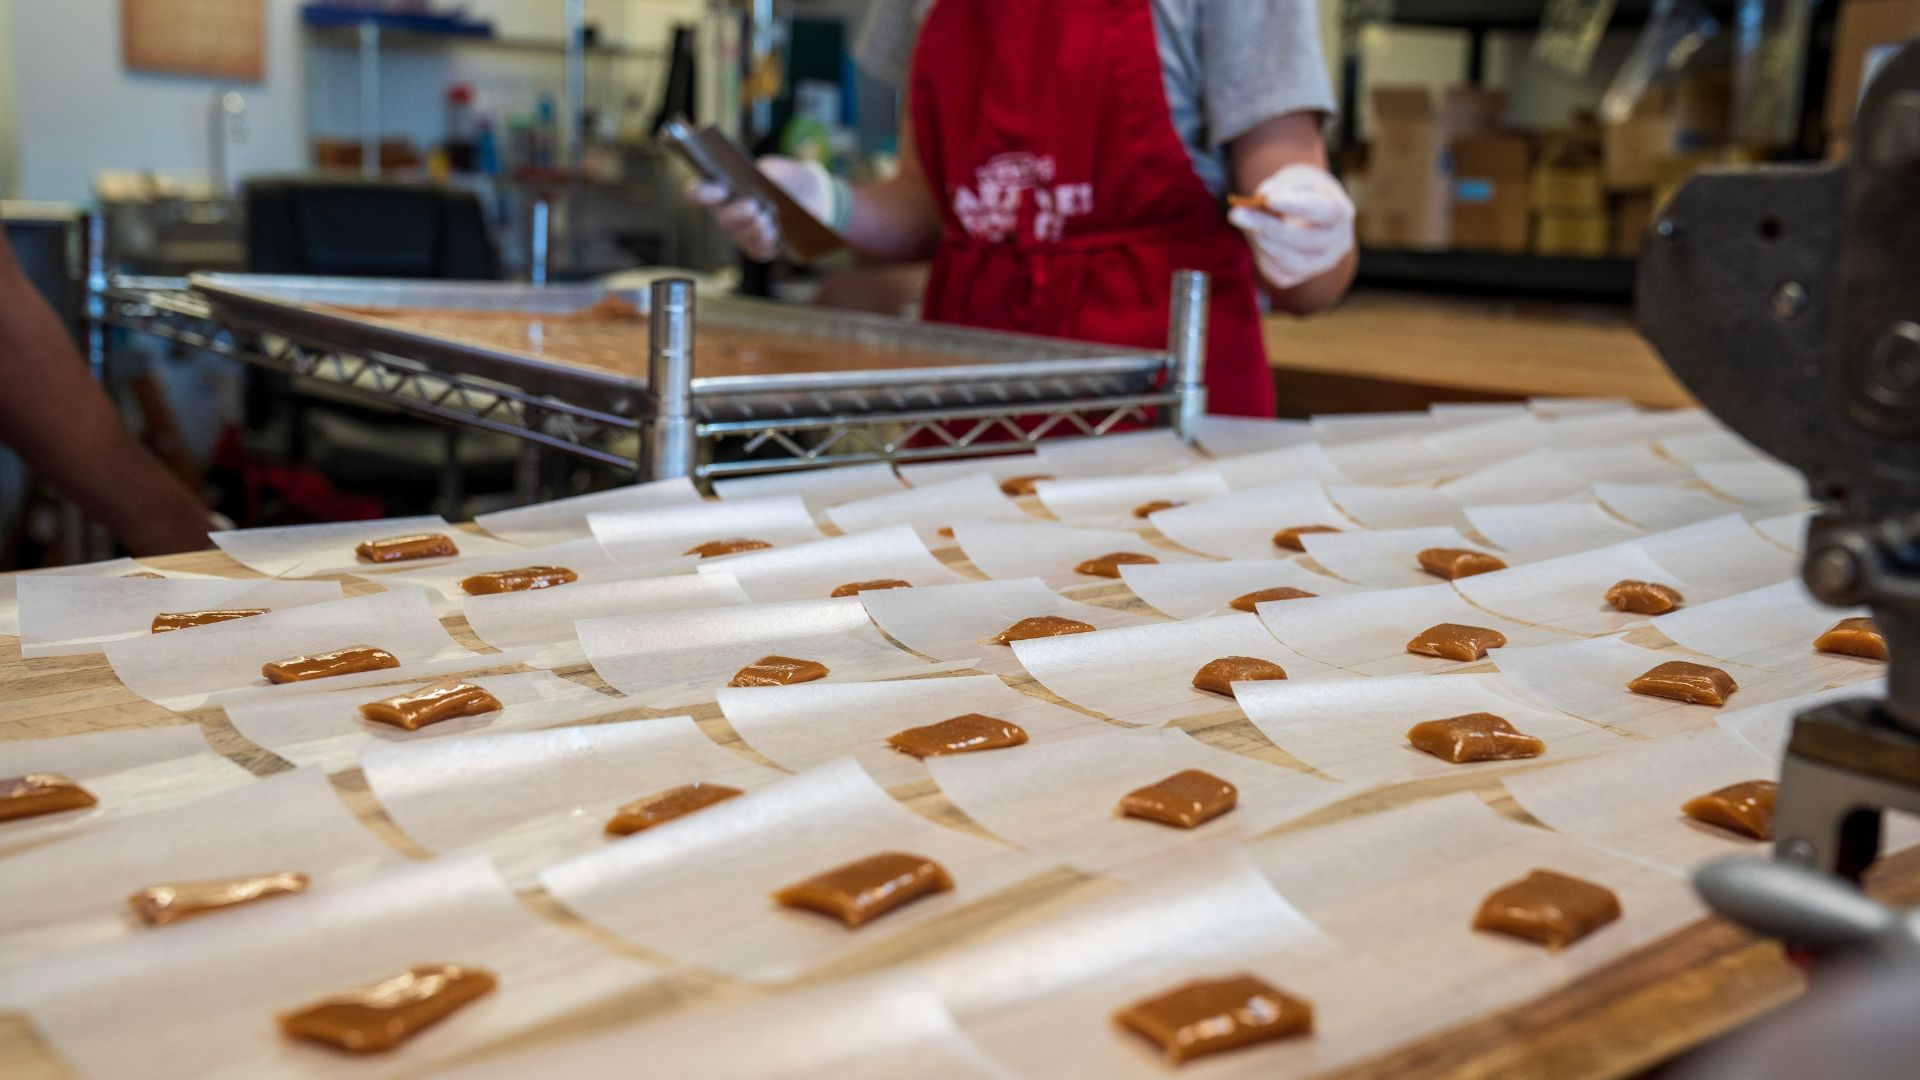 The Caramel House specializes in small-batch caramel candy.